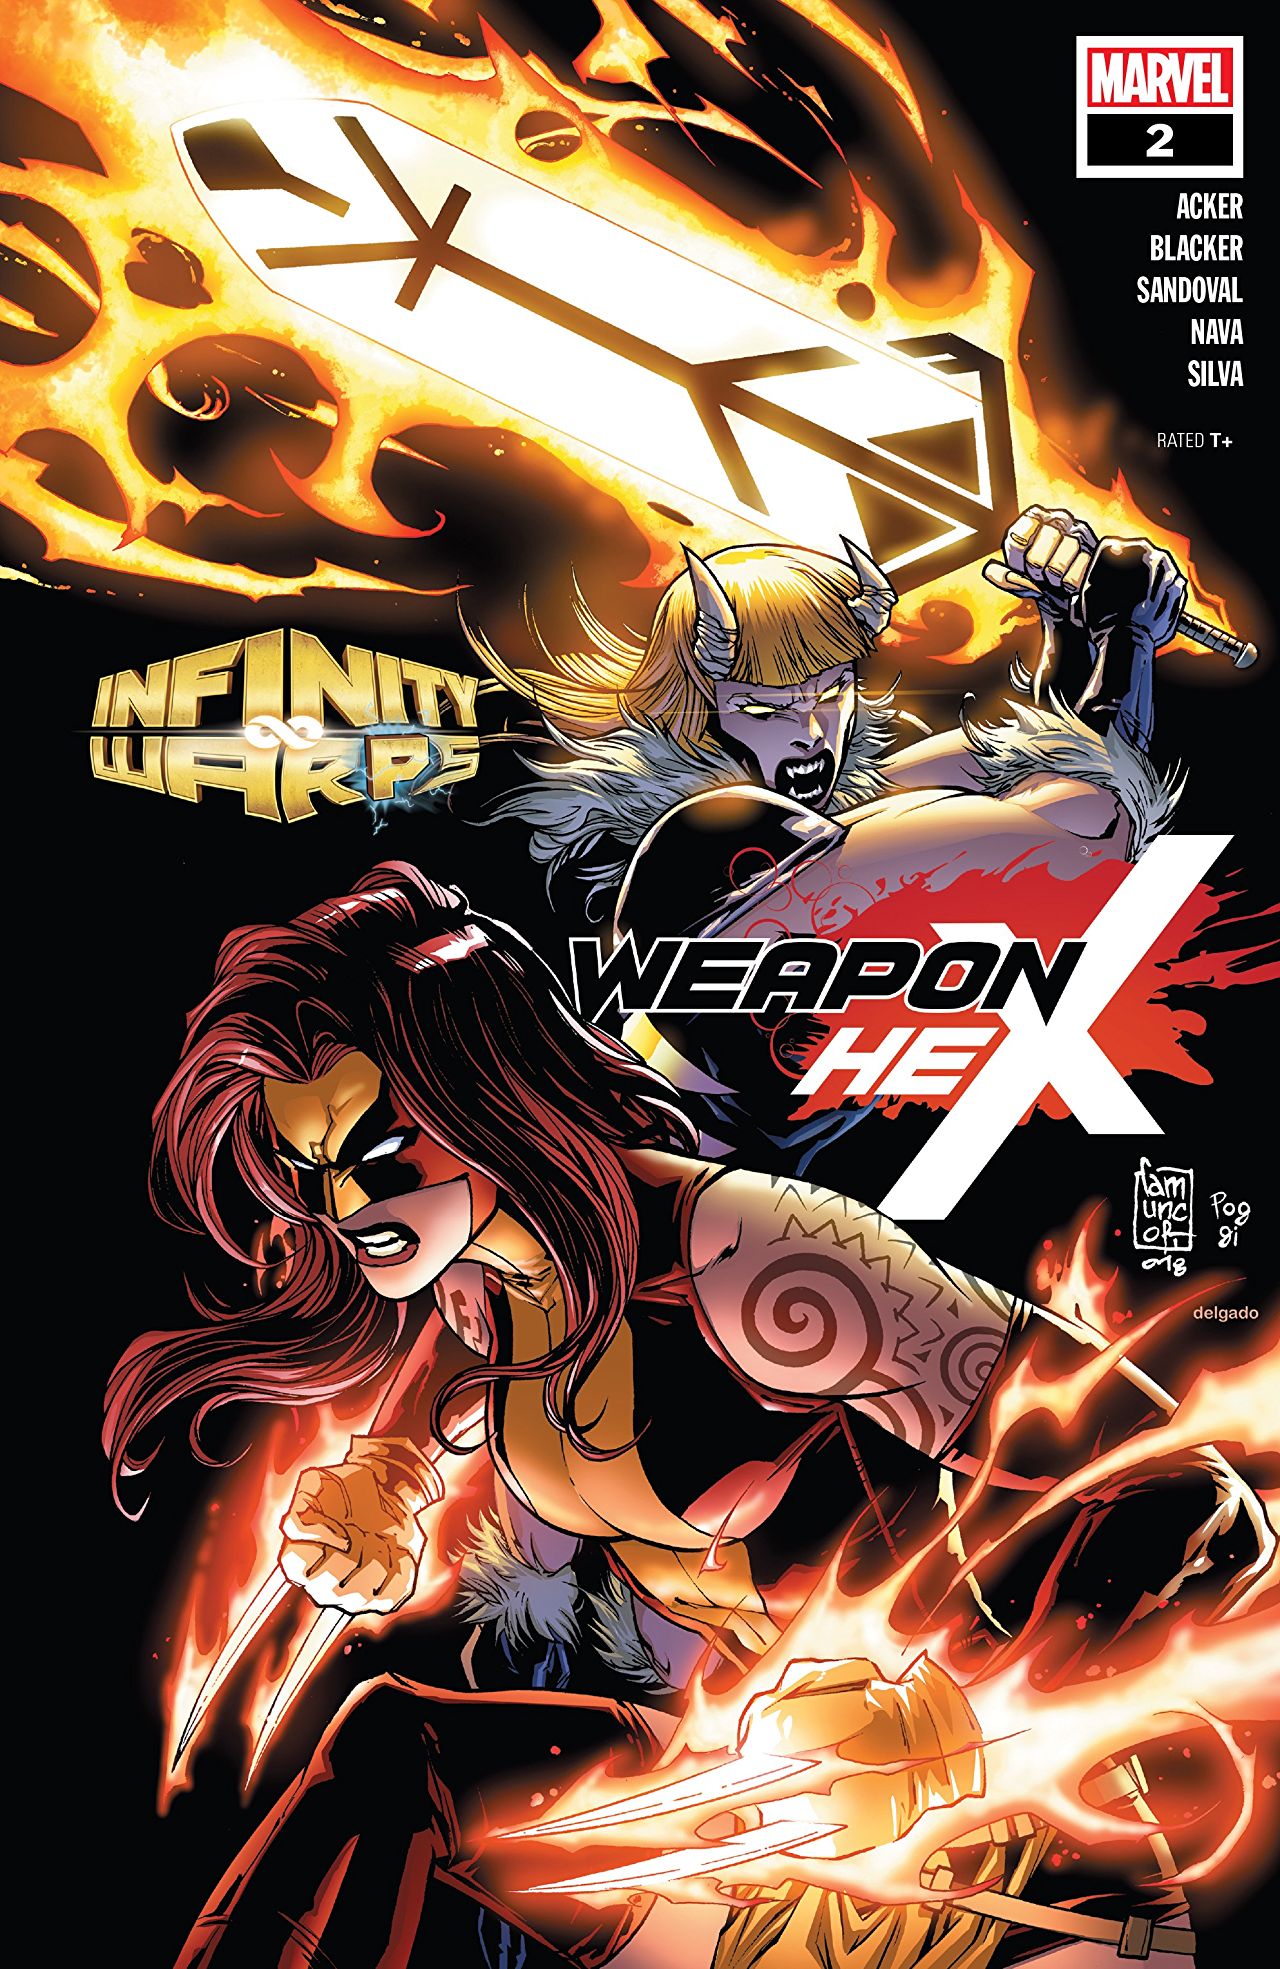 Marvel Preview: Infinity Wars: Weapon Hex (2018) #2